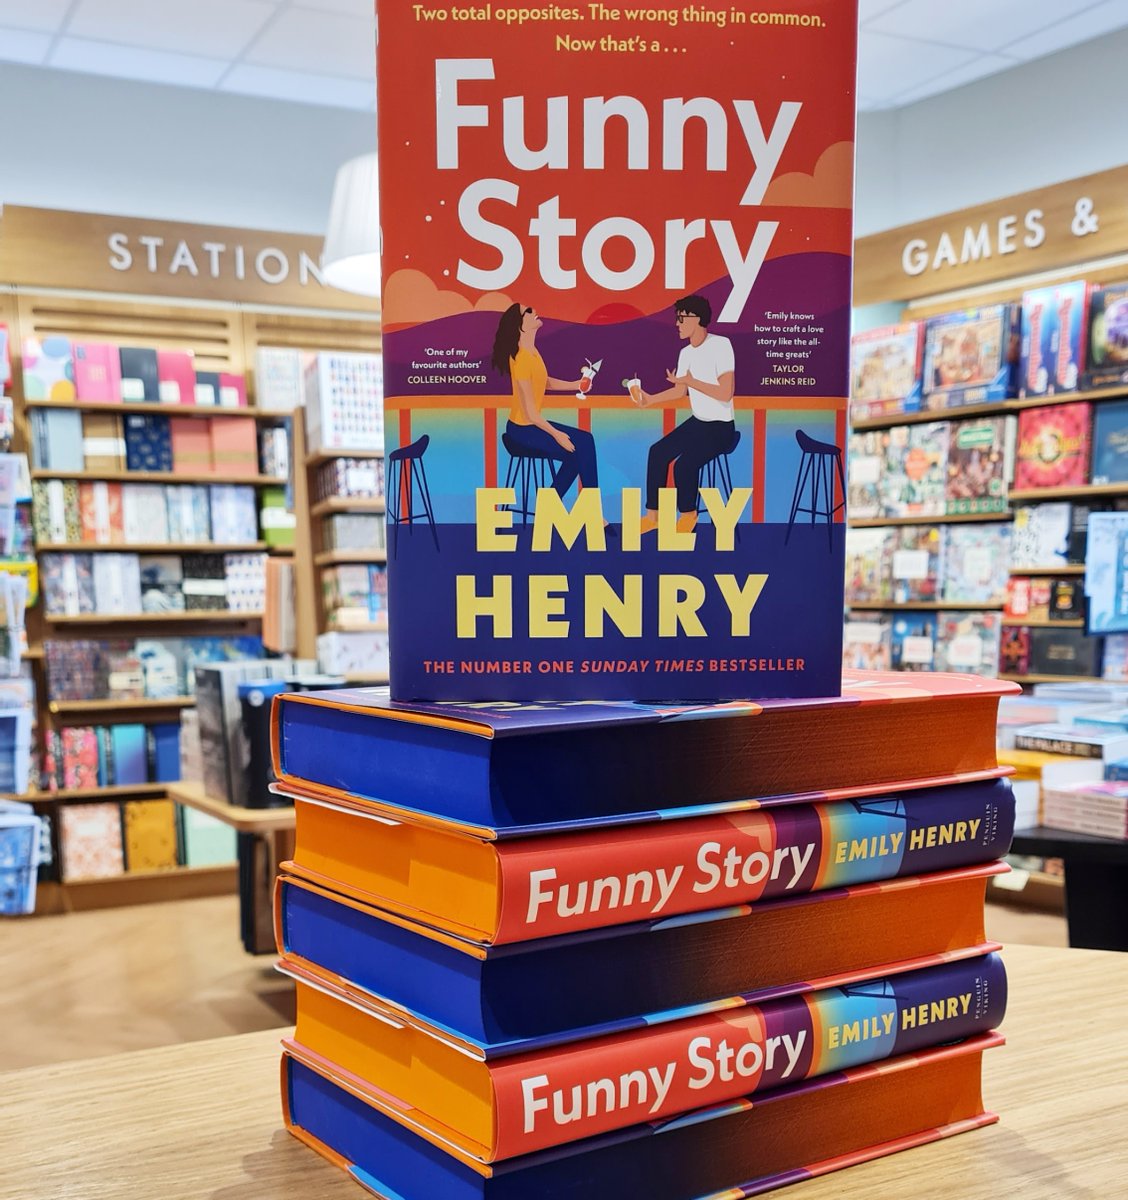 Funny Story has arrived and our exclusive editions are looking rather splendid. Once again, Emily Henry brings us a witty, romantic tale as two wronged exes hatch a plan for revenge.

#FunnyStory #EmilyHenry #WaterstonesBedford